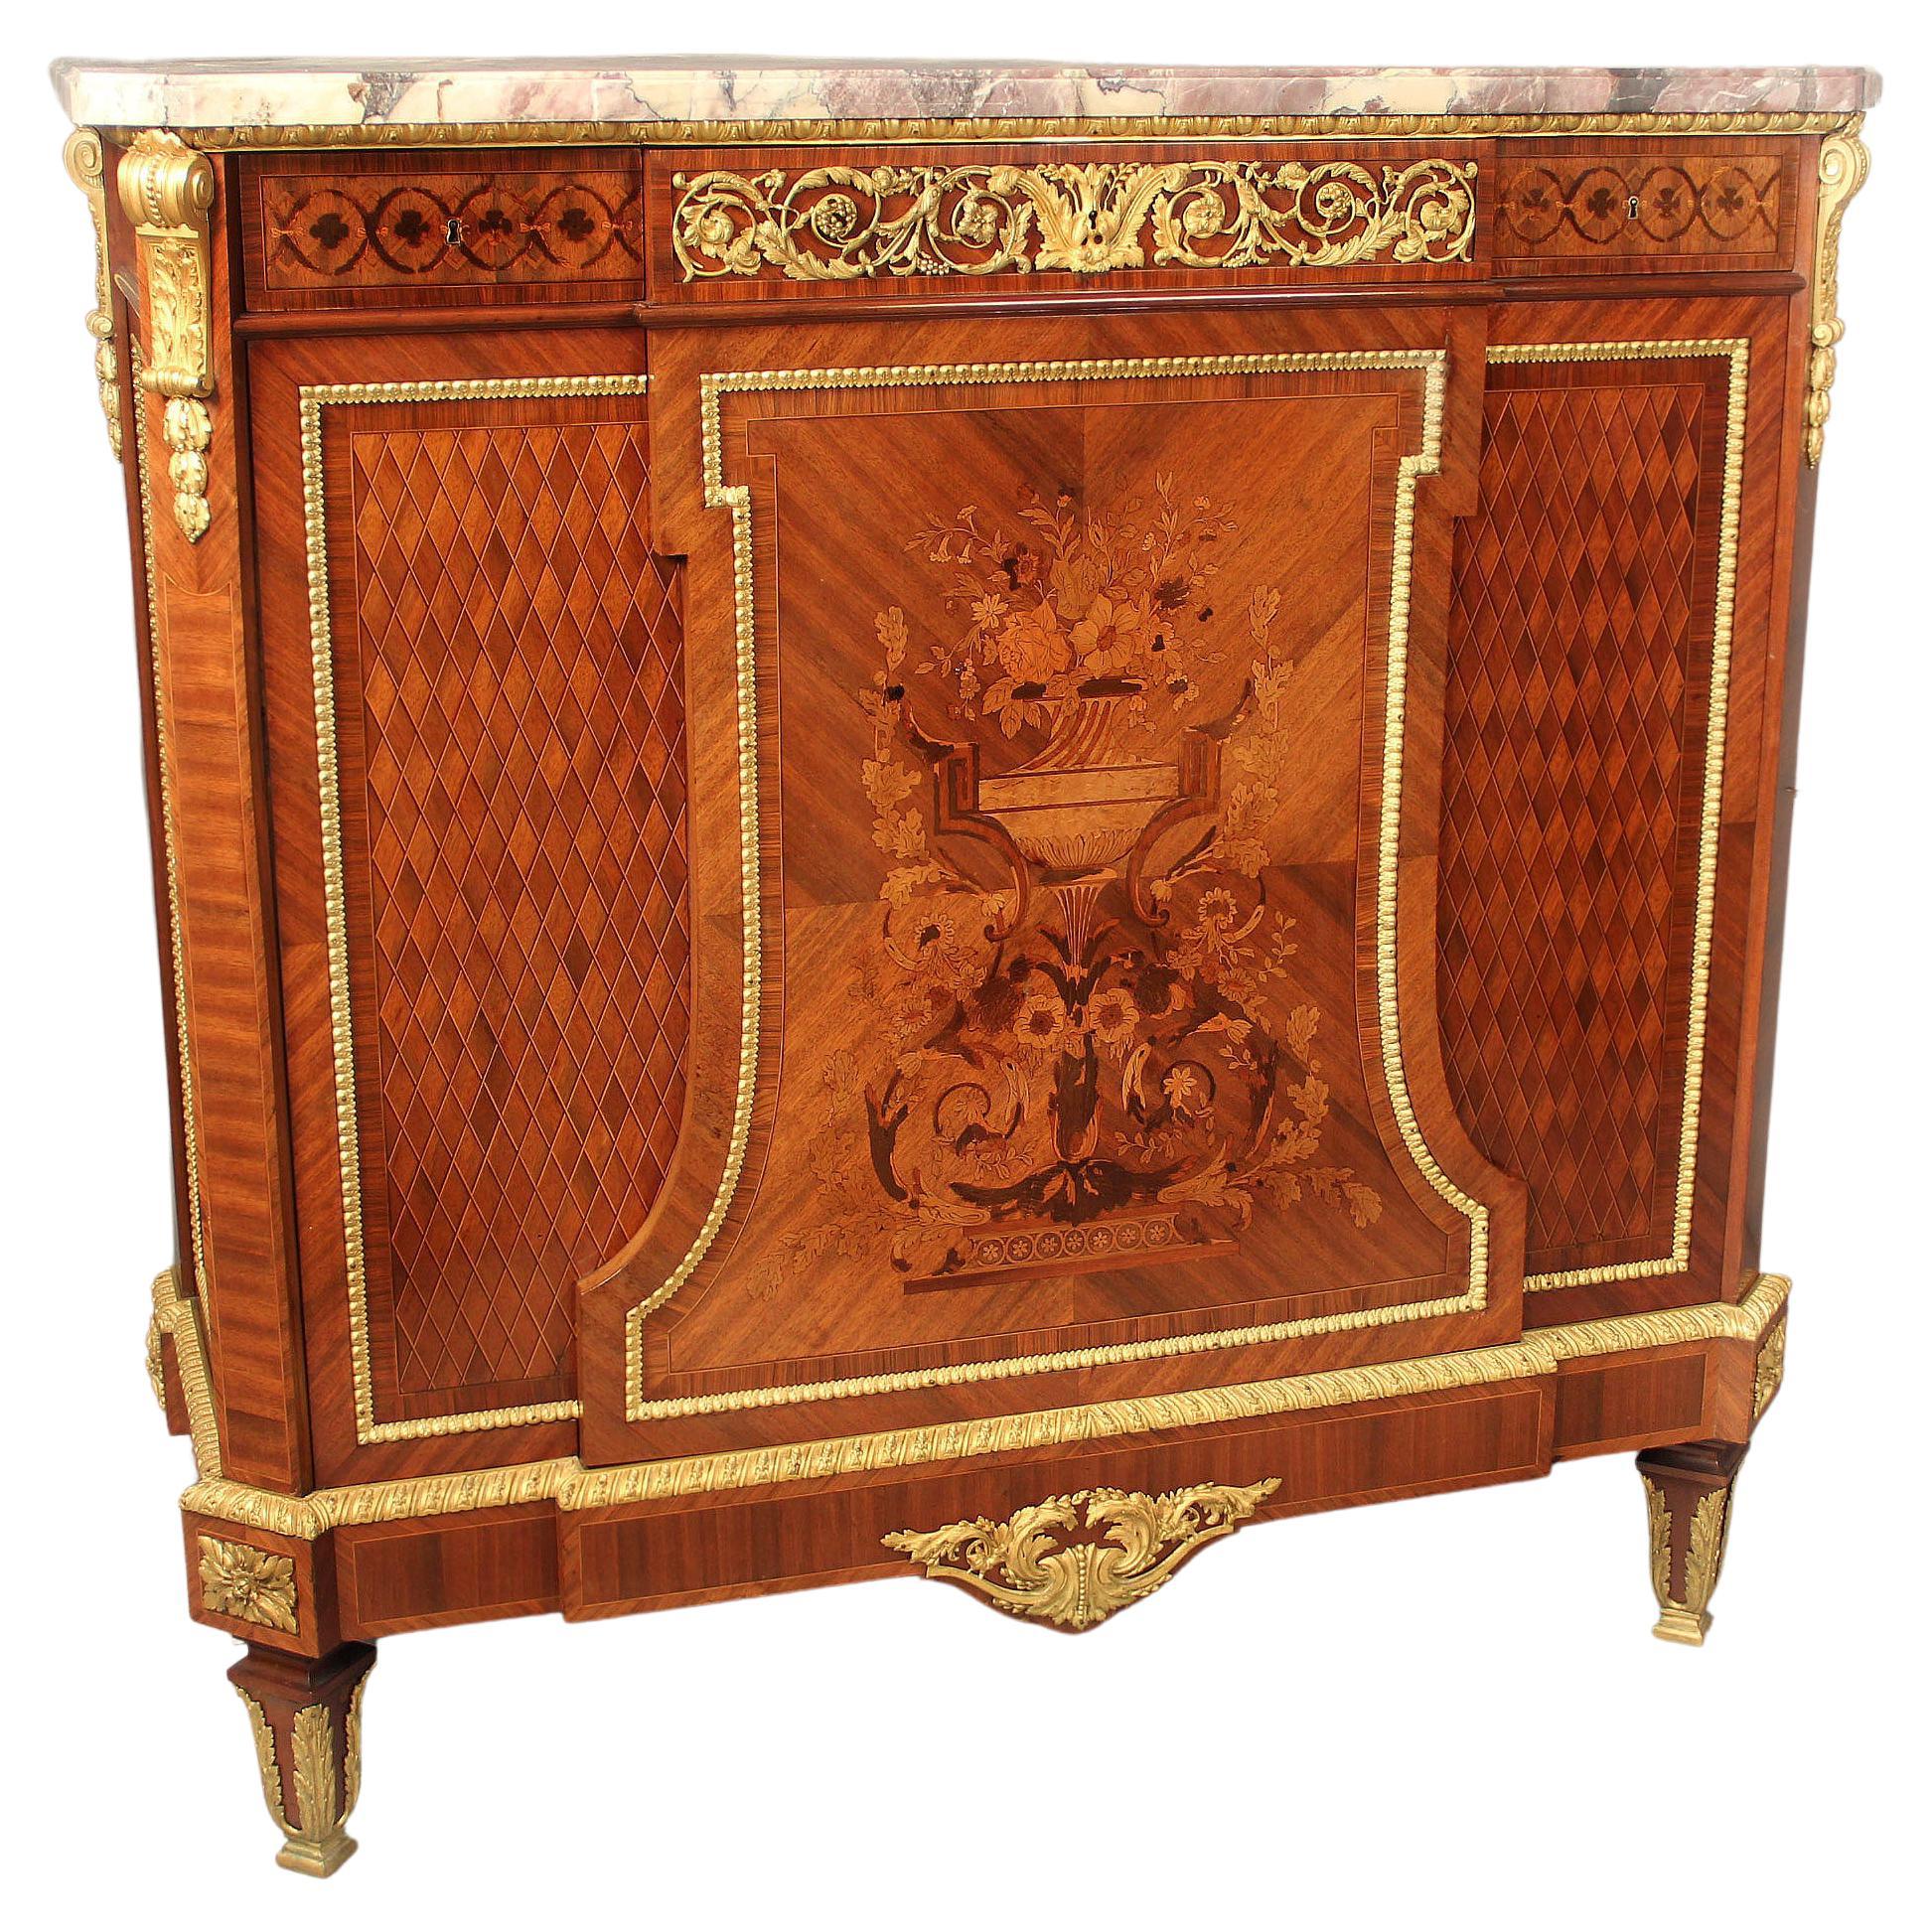 Late 19th Century Gilt Bronze Mounted Marquetry Cabinet by Maison Forest Paris